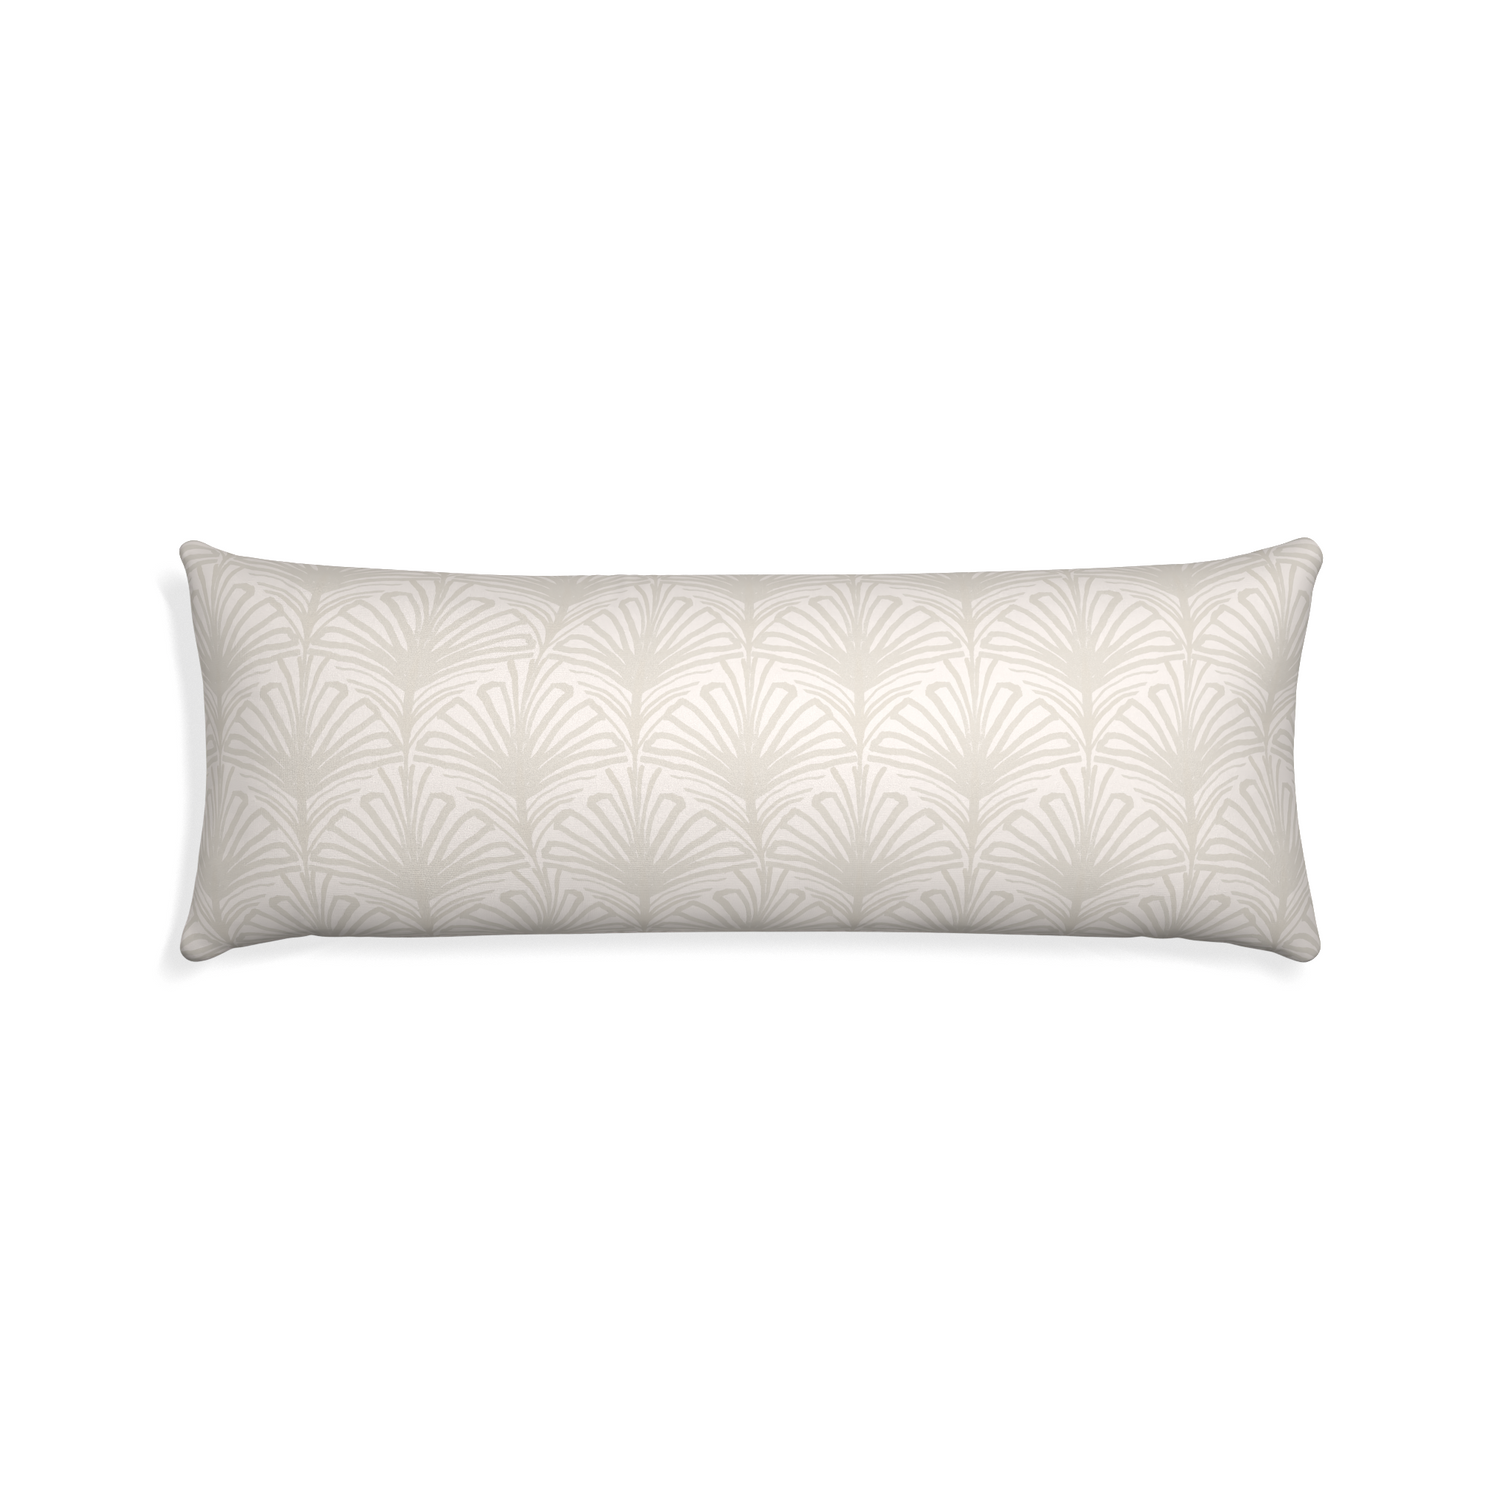 Xl-lumbar suzy sand custom pillow with none on white background